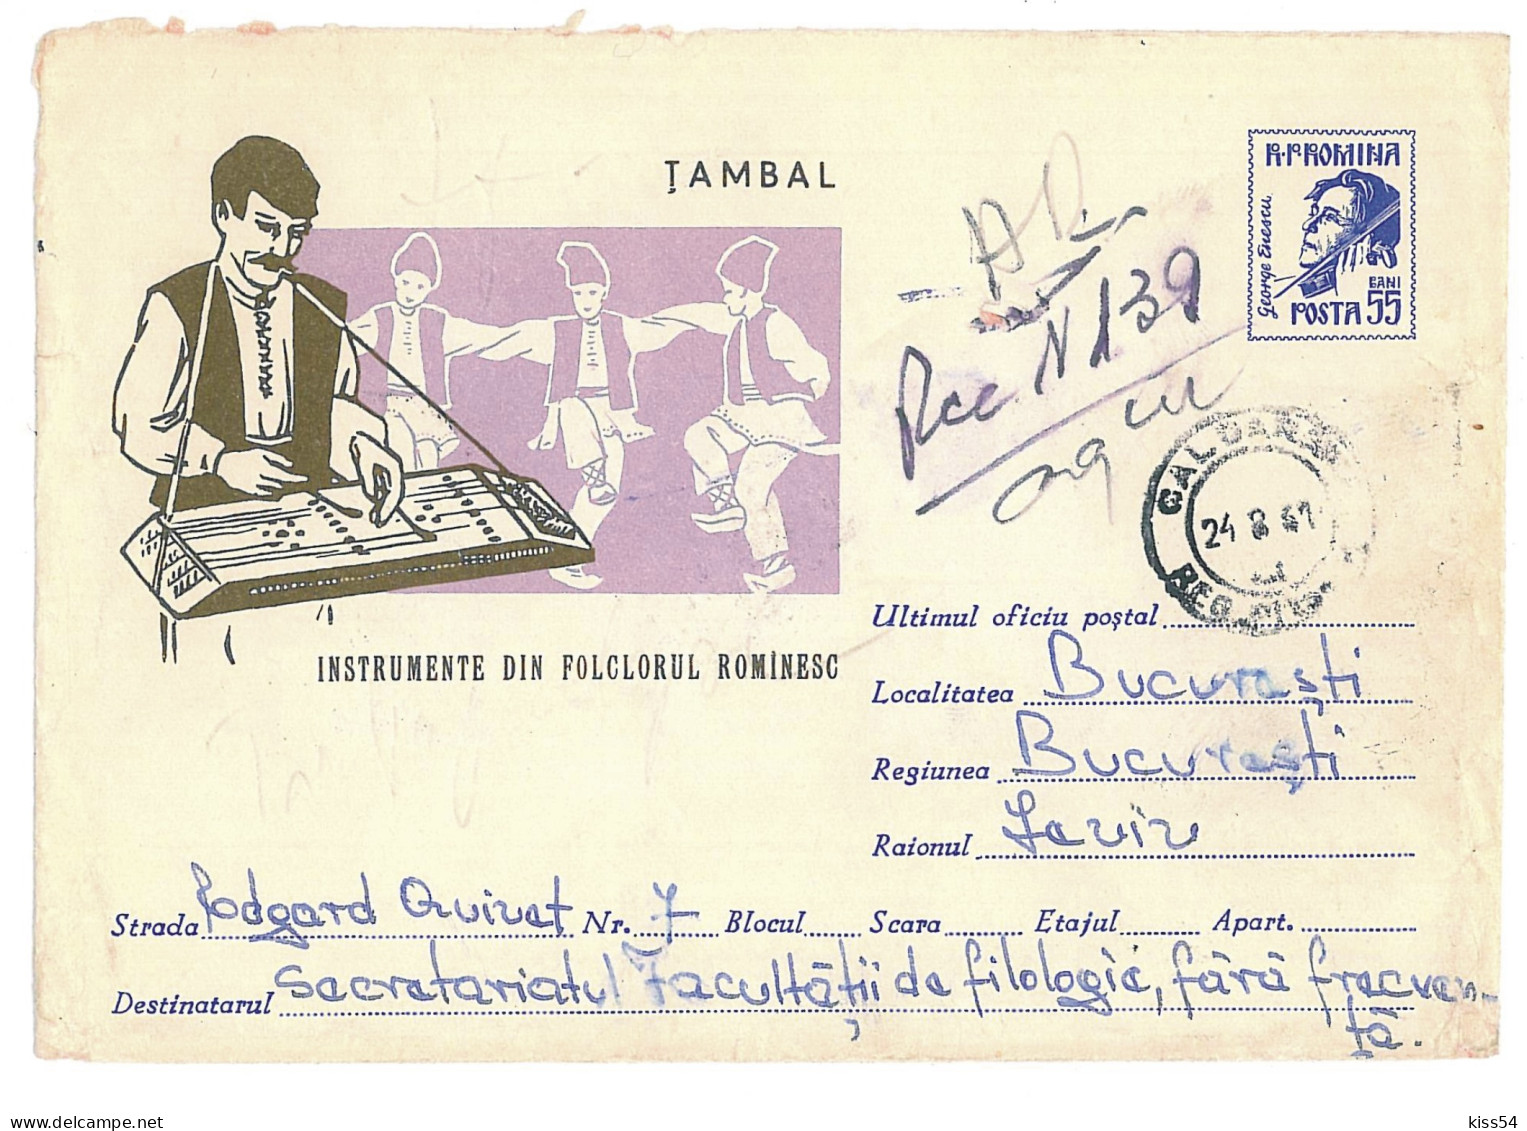 IP 61 - 0487a MUSIC, Popular Musical Instruments, Cimbalom, Romania - REGISTERED Stationery - Used - 1961 - Entiers Postaux